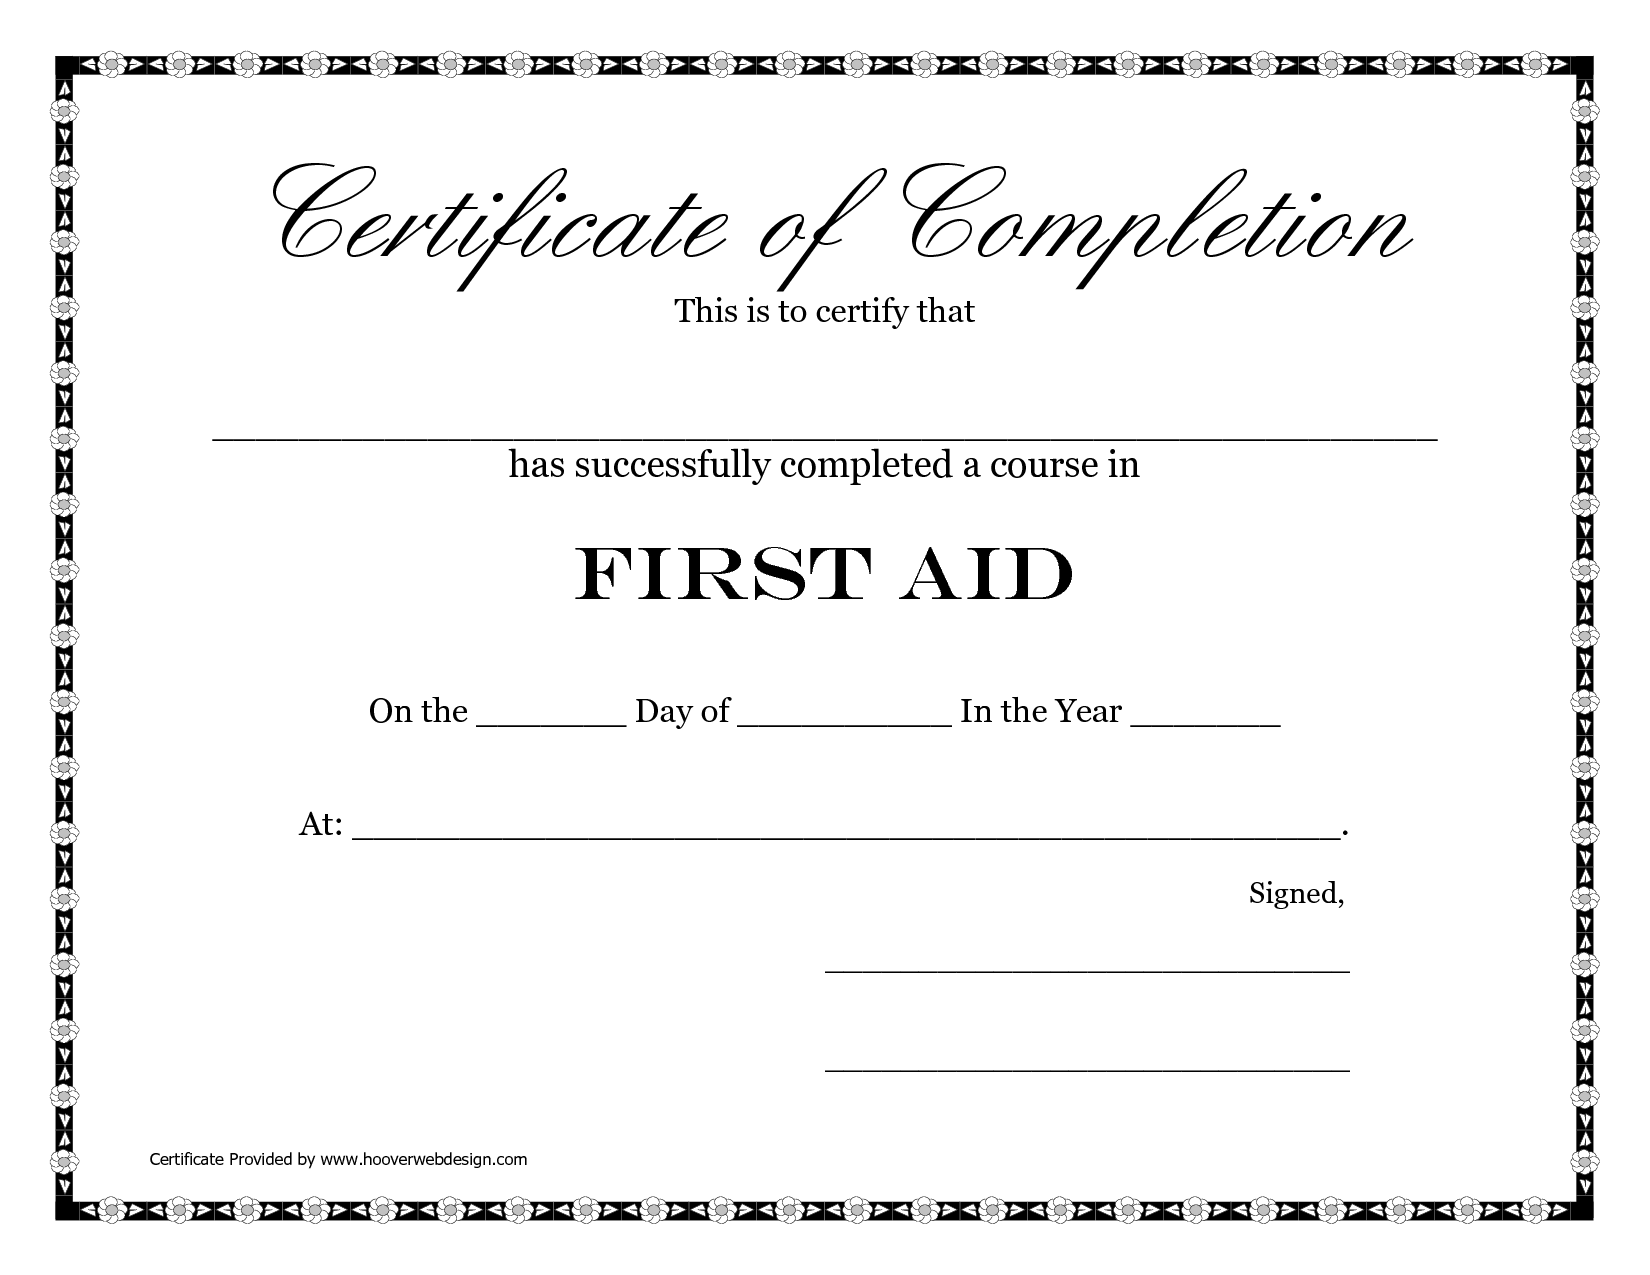 first-aid-certificate-template-free-7-greatest-choices-fresh